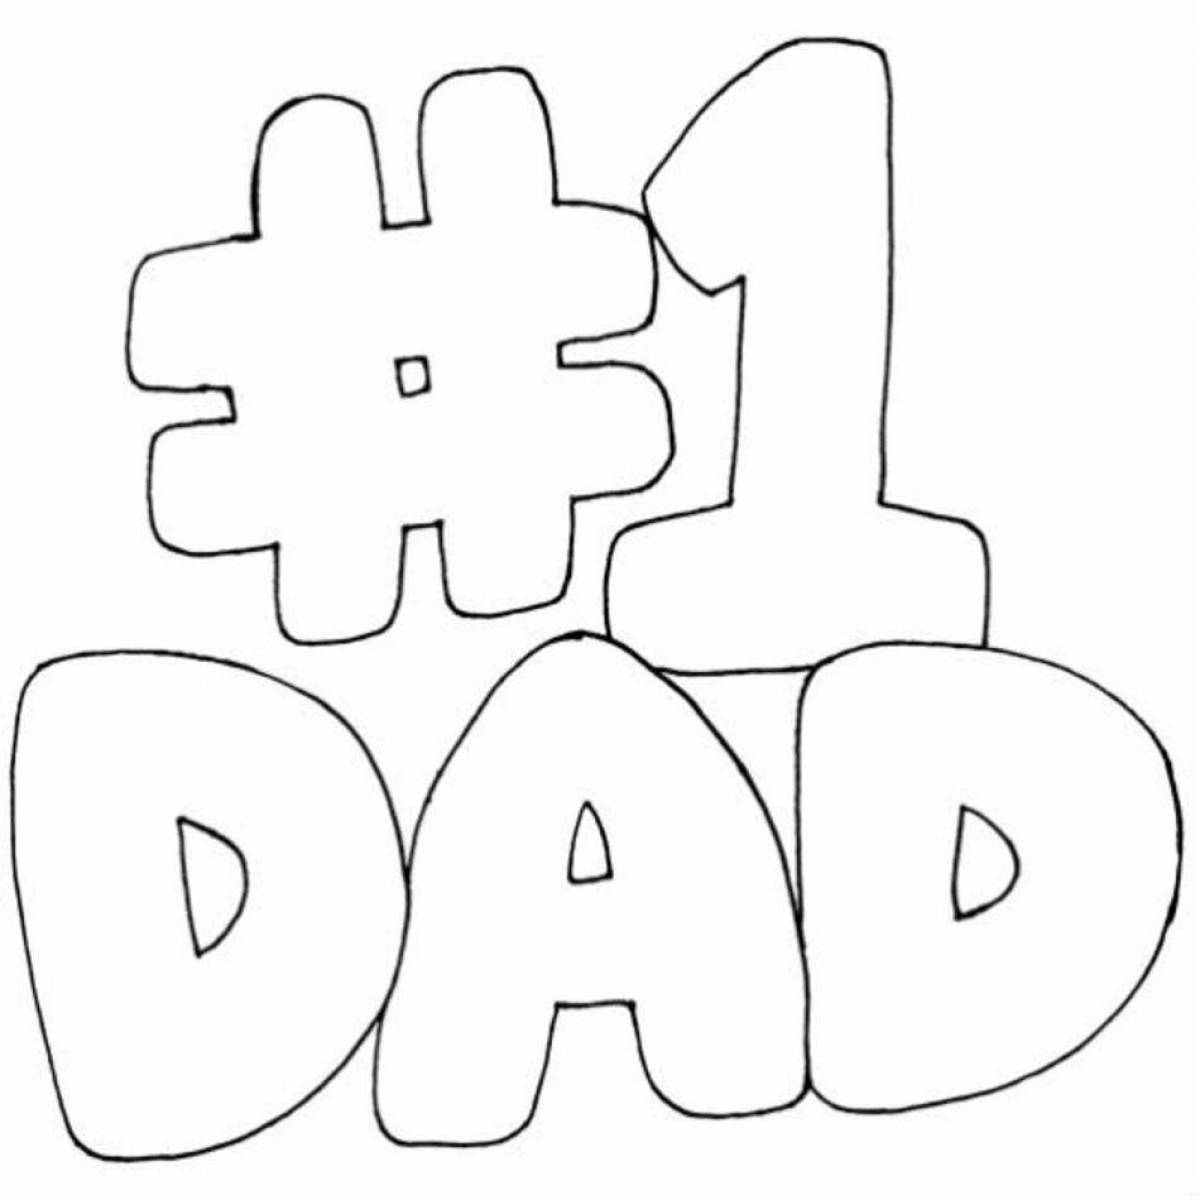 Playful dad coloring for dad's day